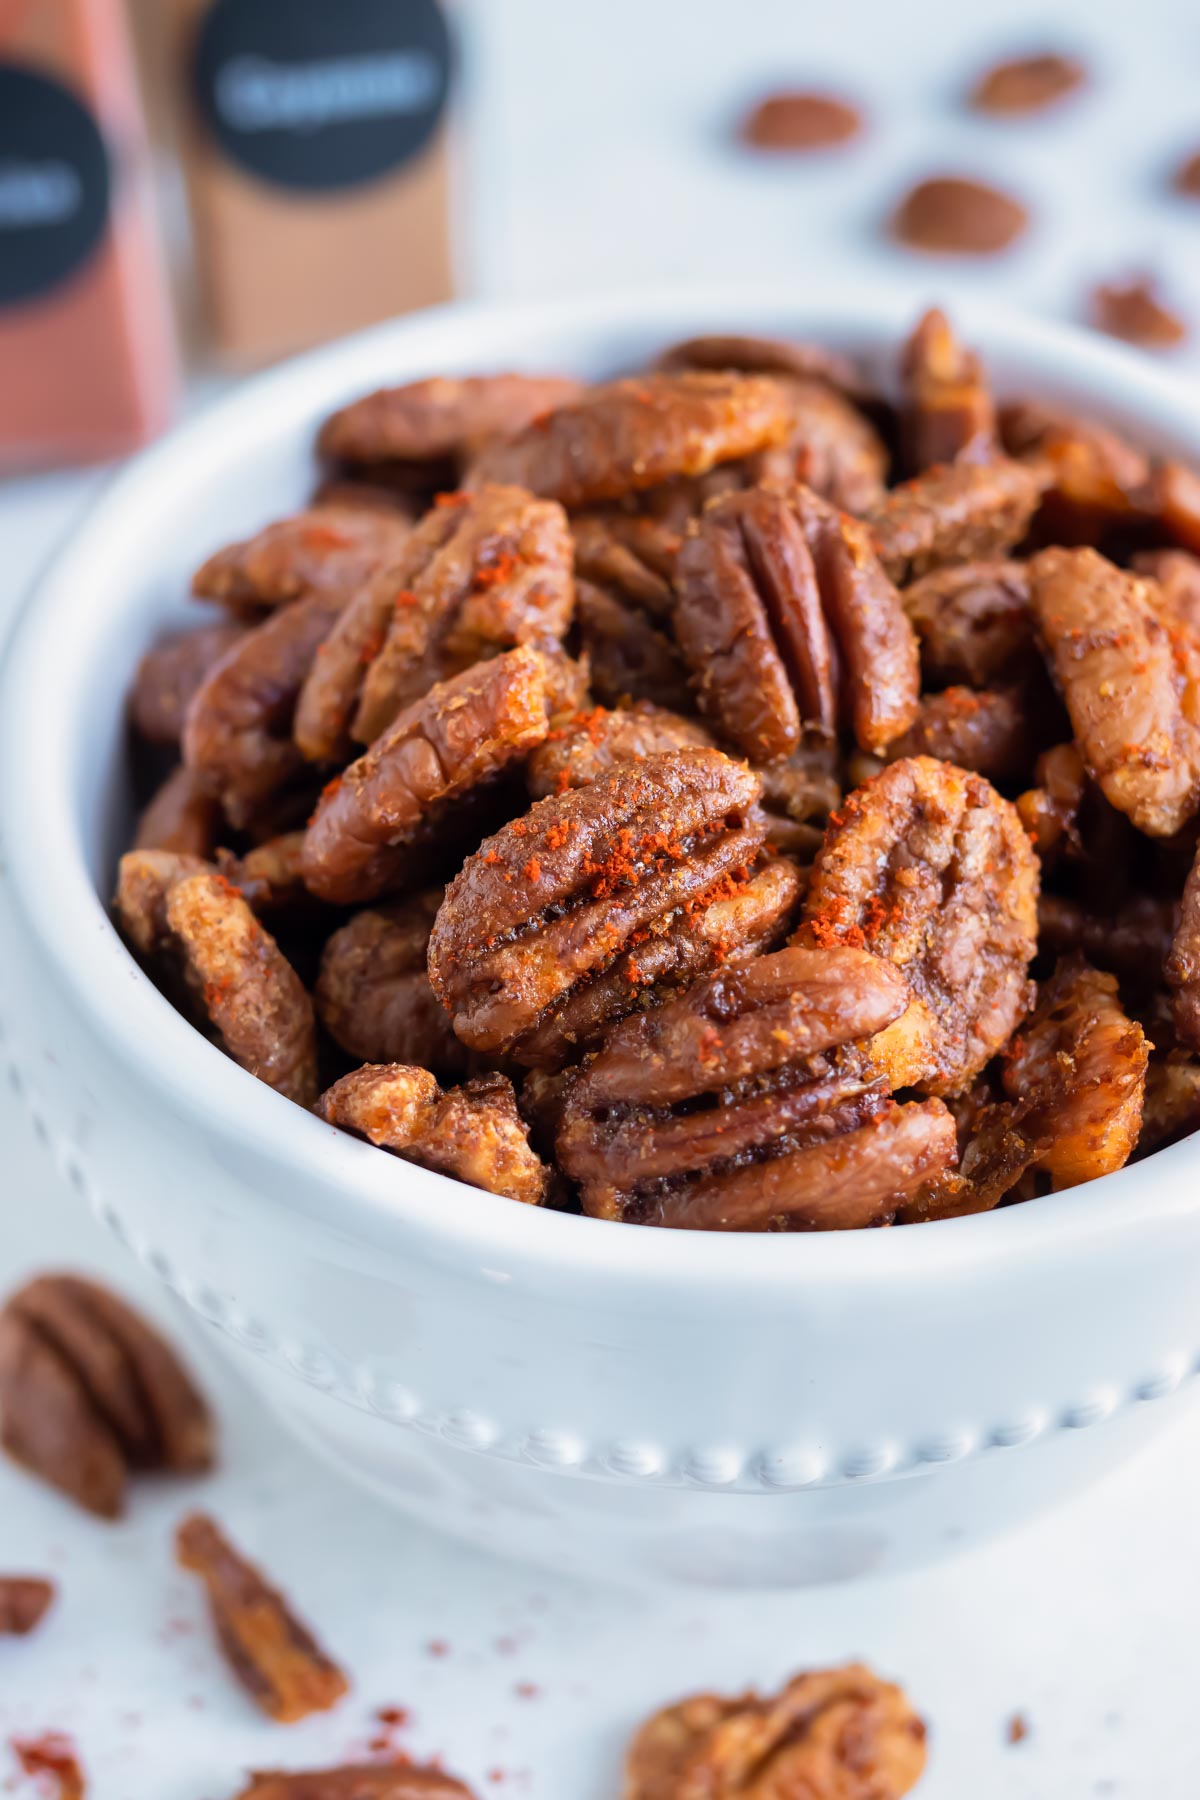 Oven toasted pecans are put in a bowl on the counter for a keto snack.